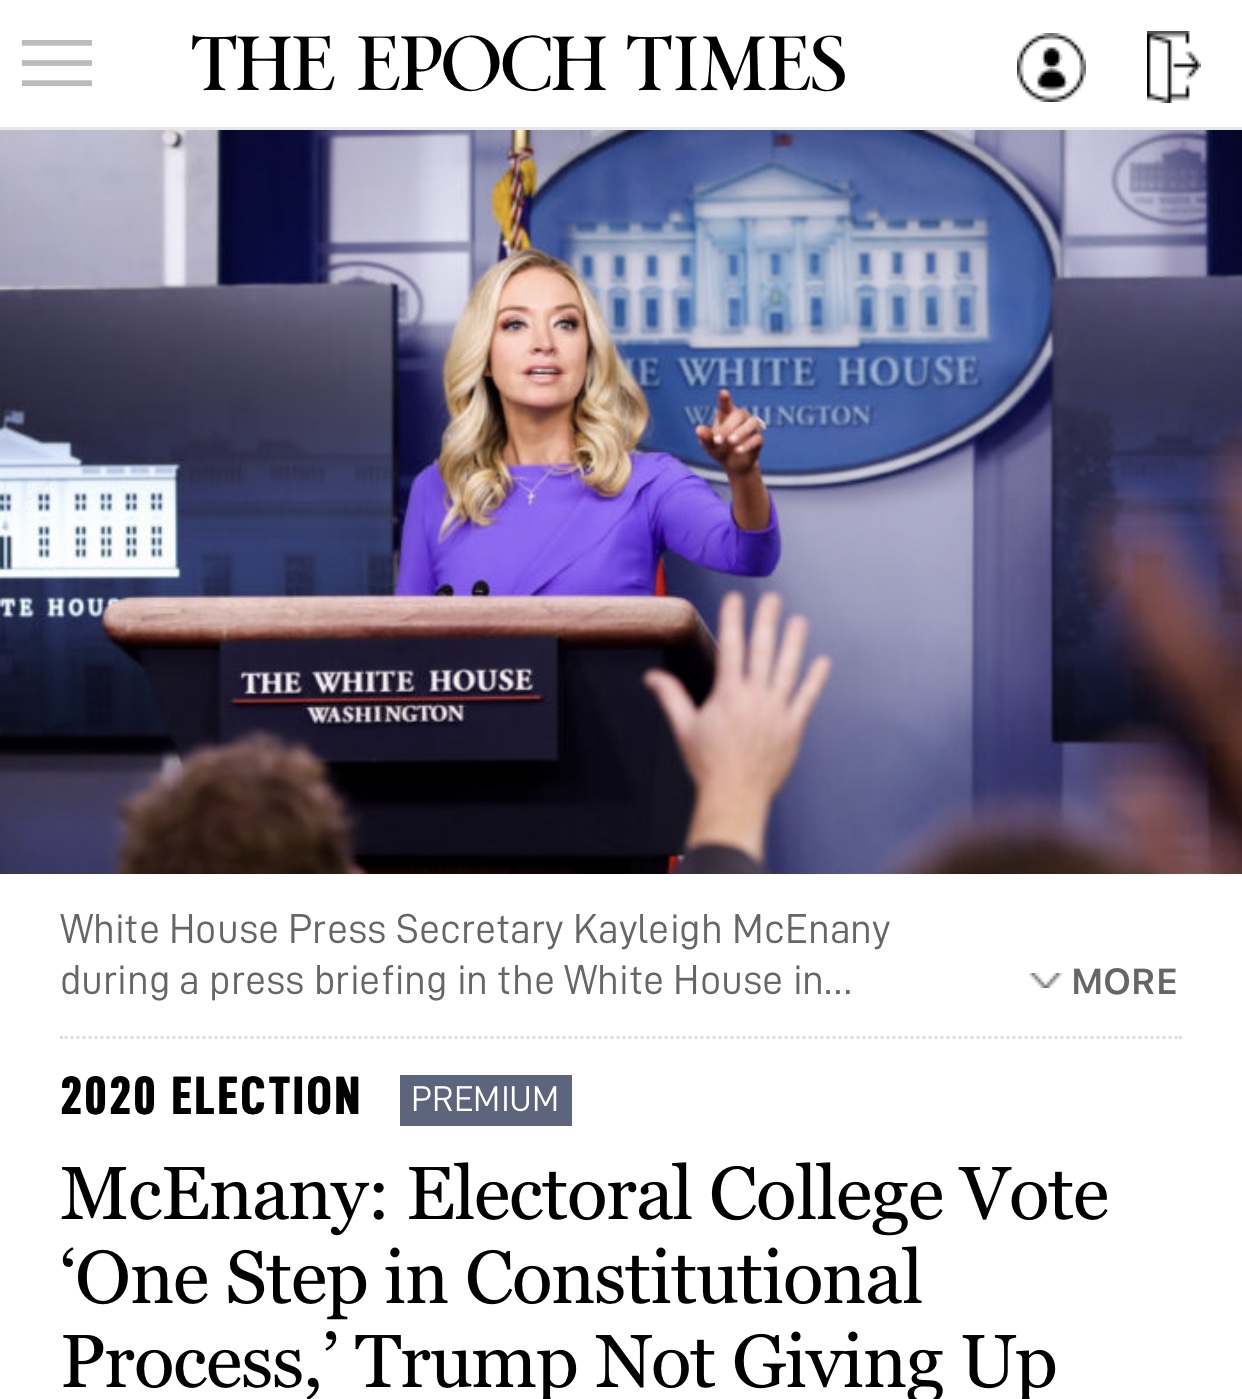 McEnany: Electoral College Vote ‘One Step in Constitutional Process,’ Trump Not Giving Up